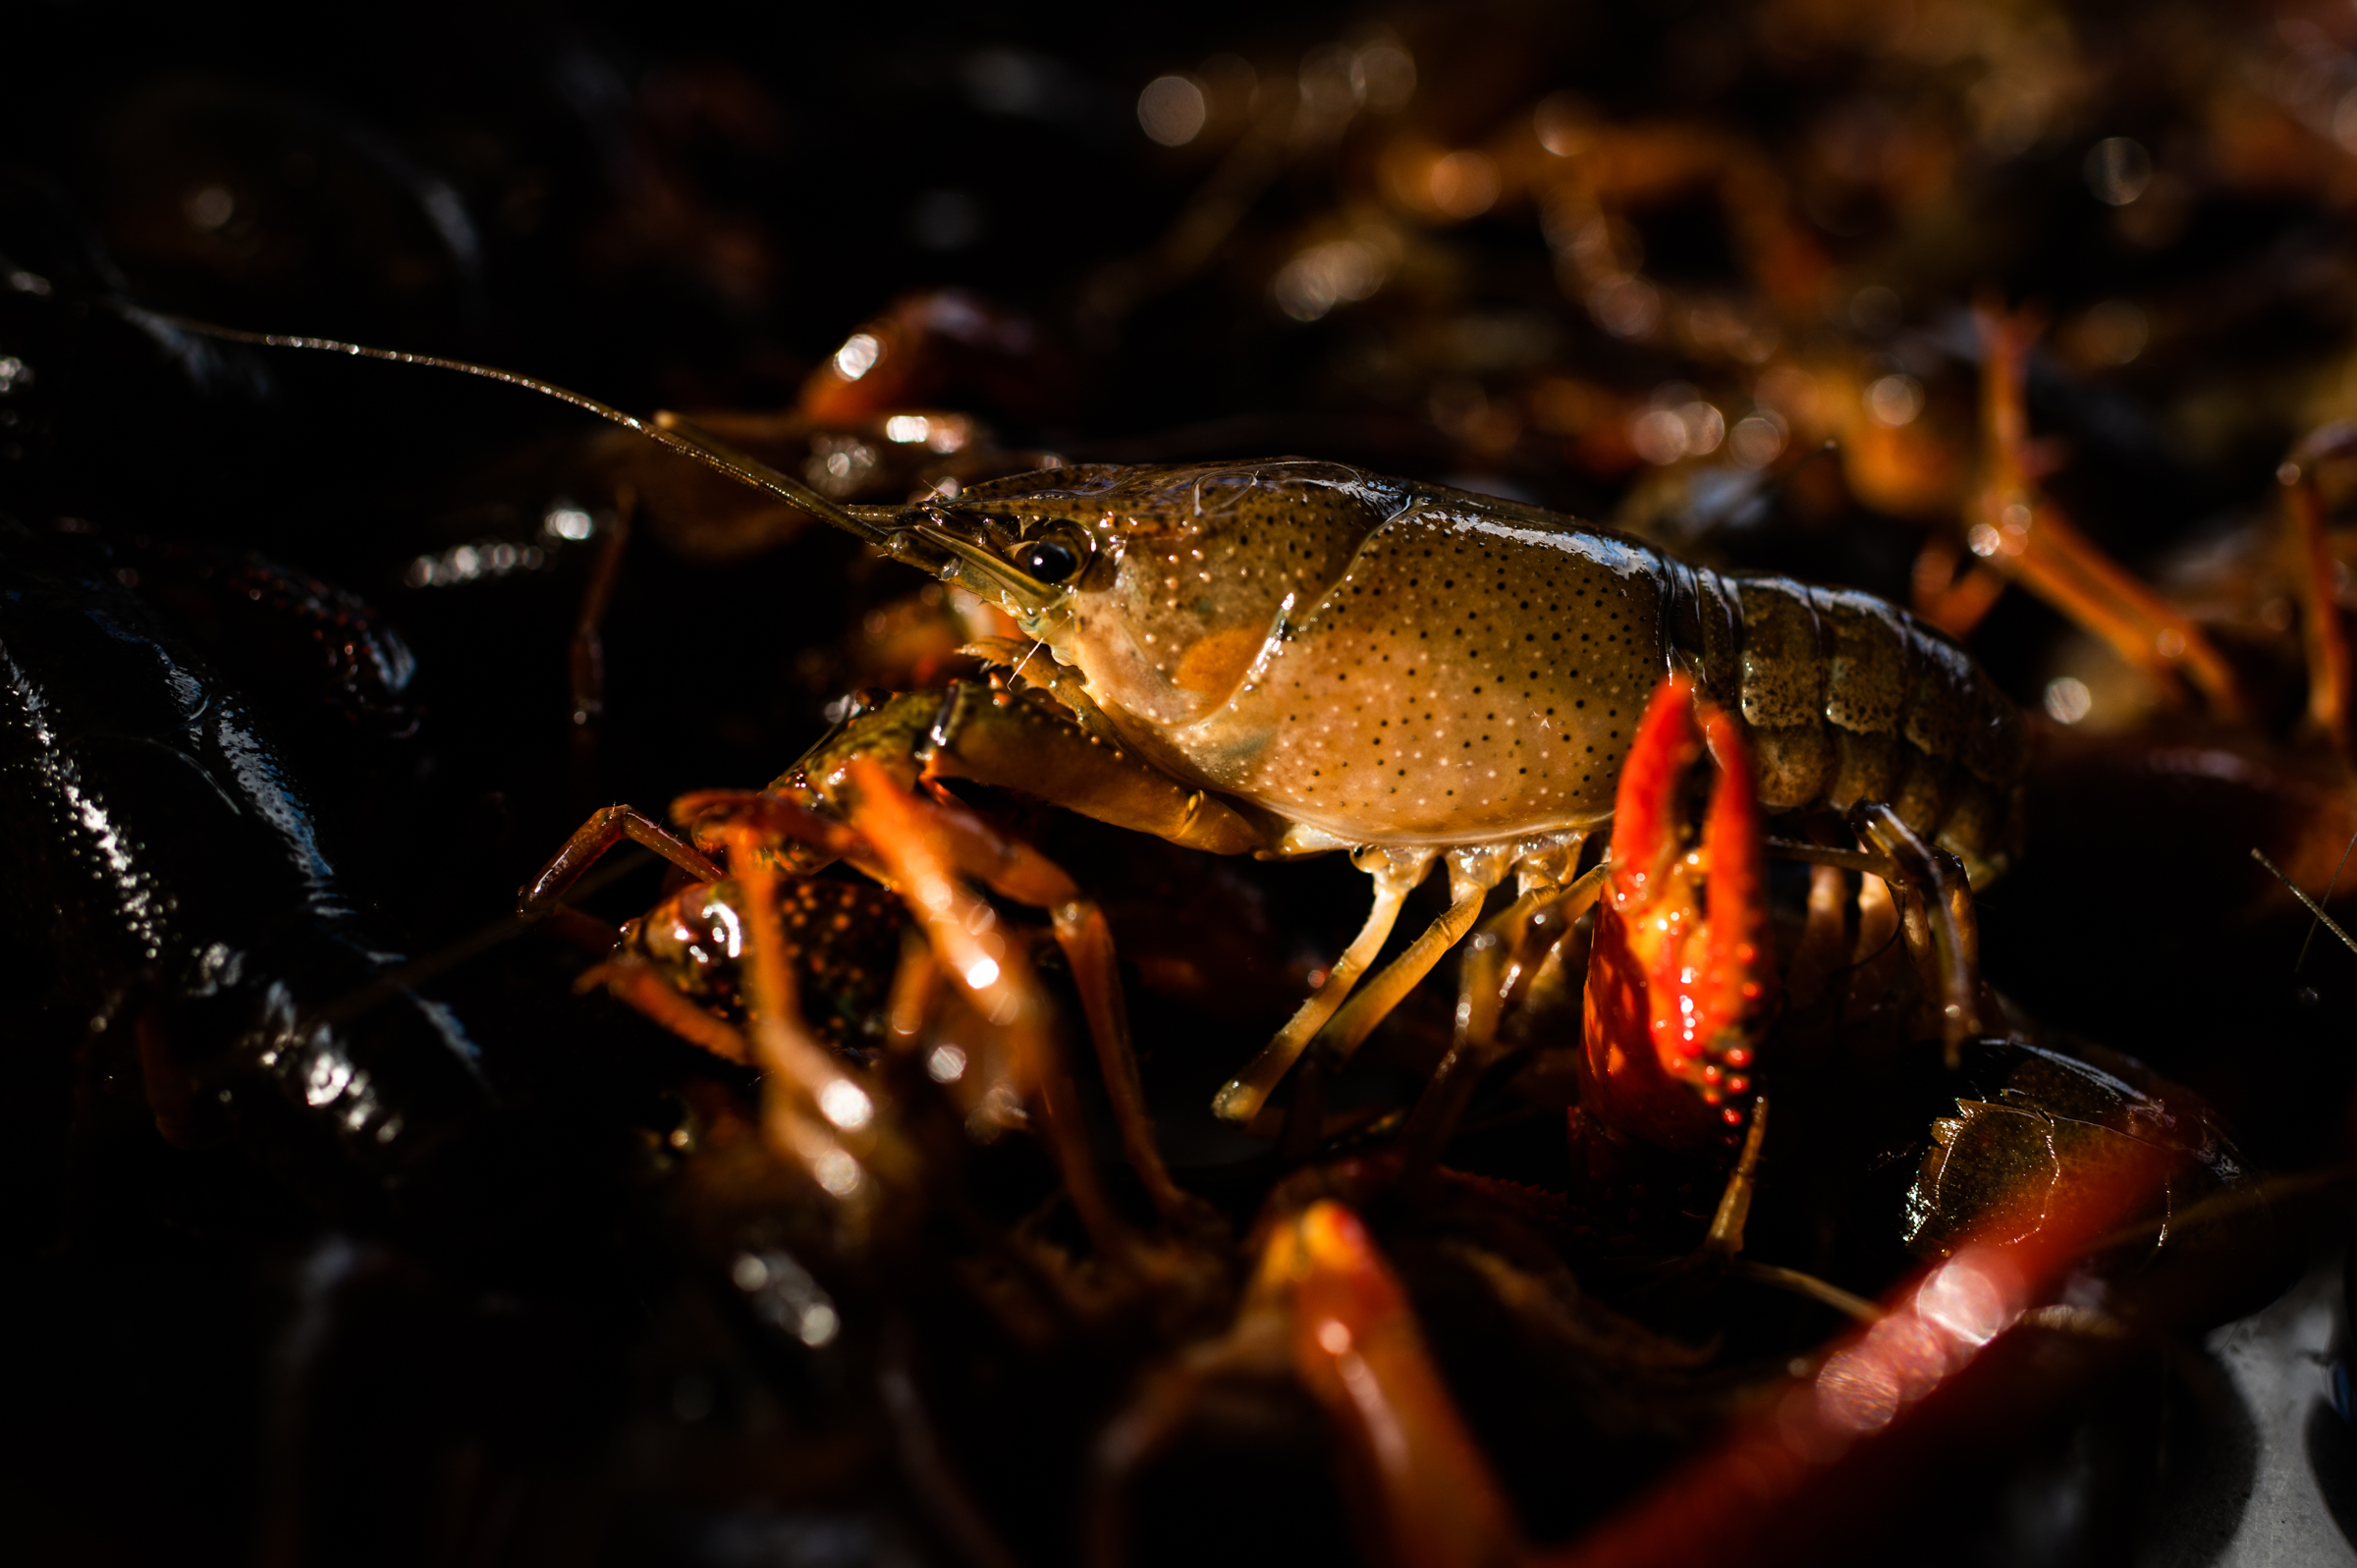 Portrait of a crawfish ready for the boil